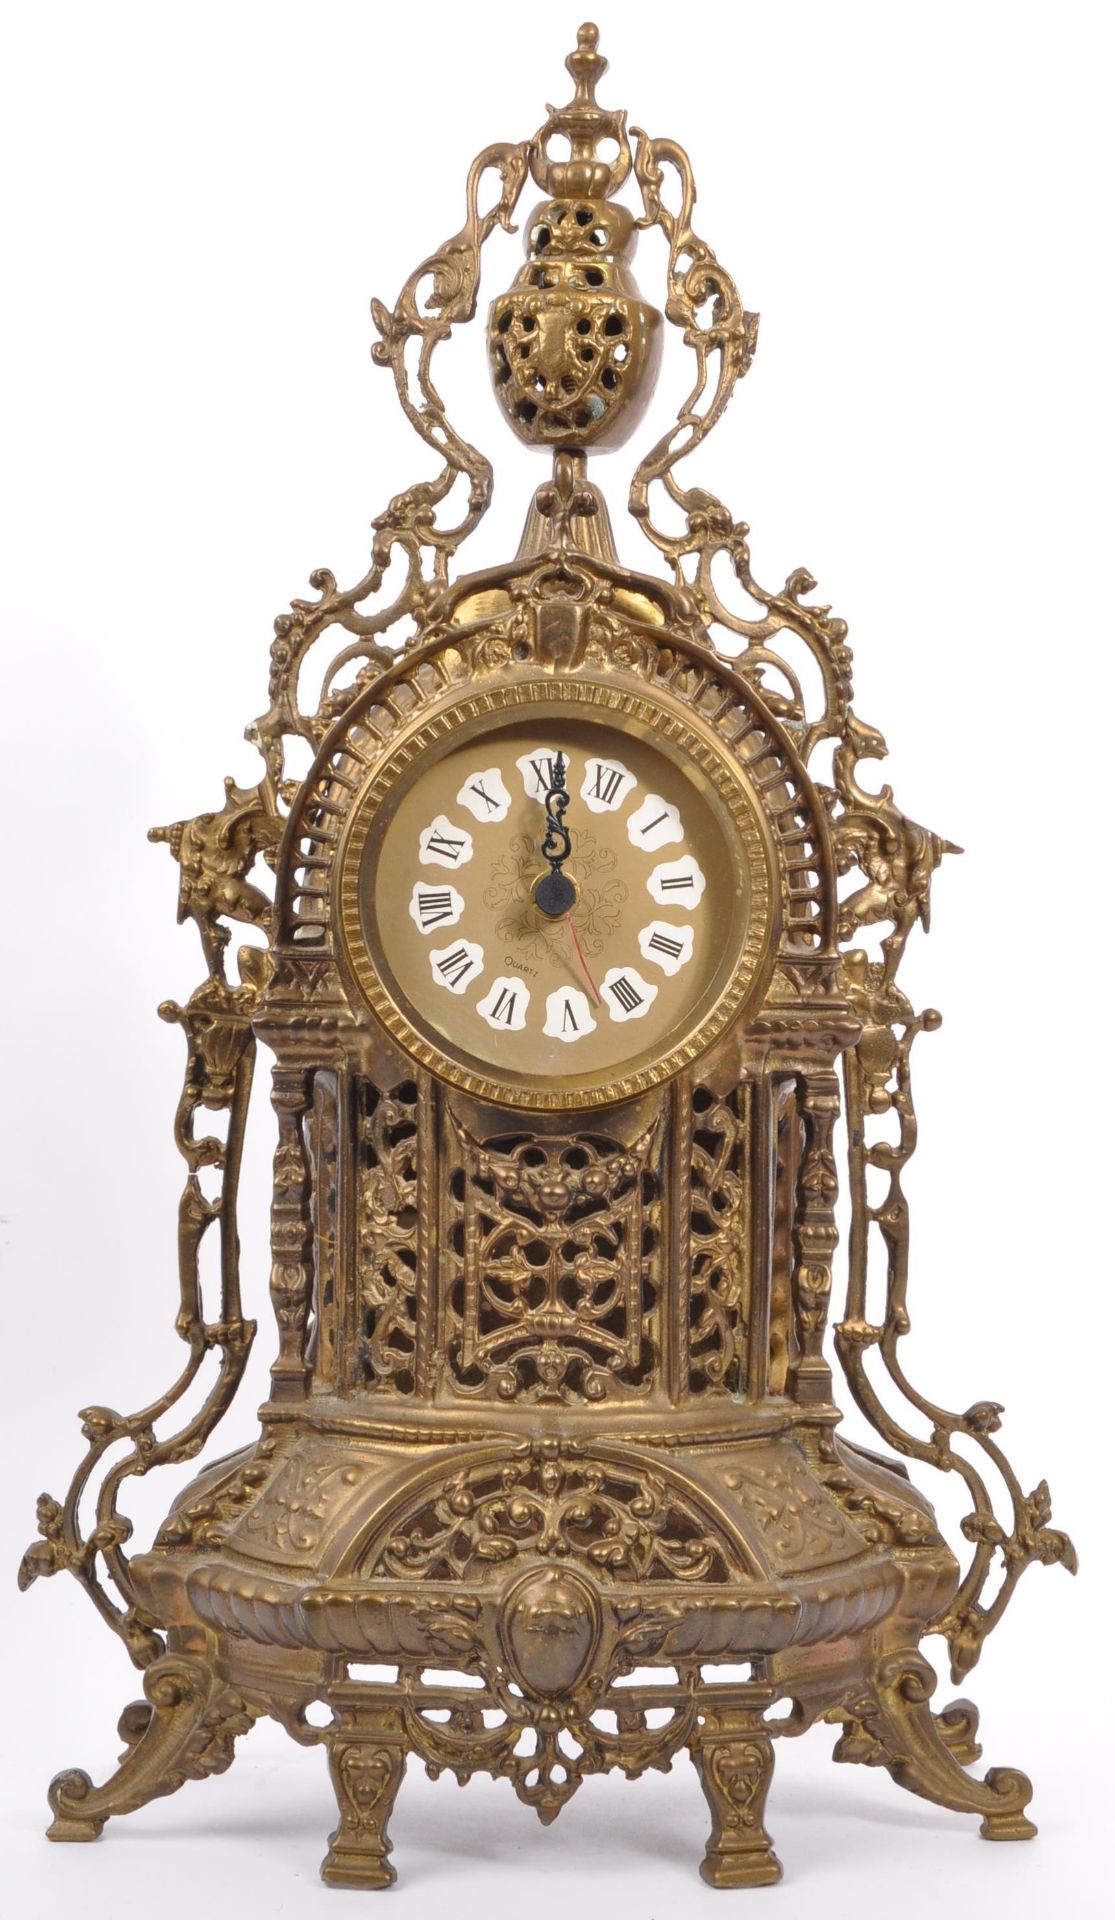 LARGE EARLY 20TH CENTURY ORNATE SCROLLED BRASS CLOCK BODY